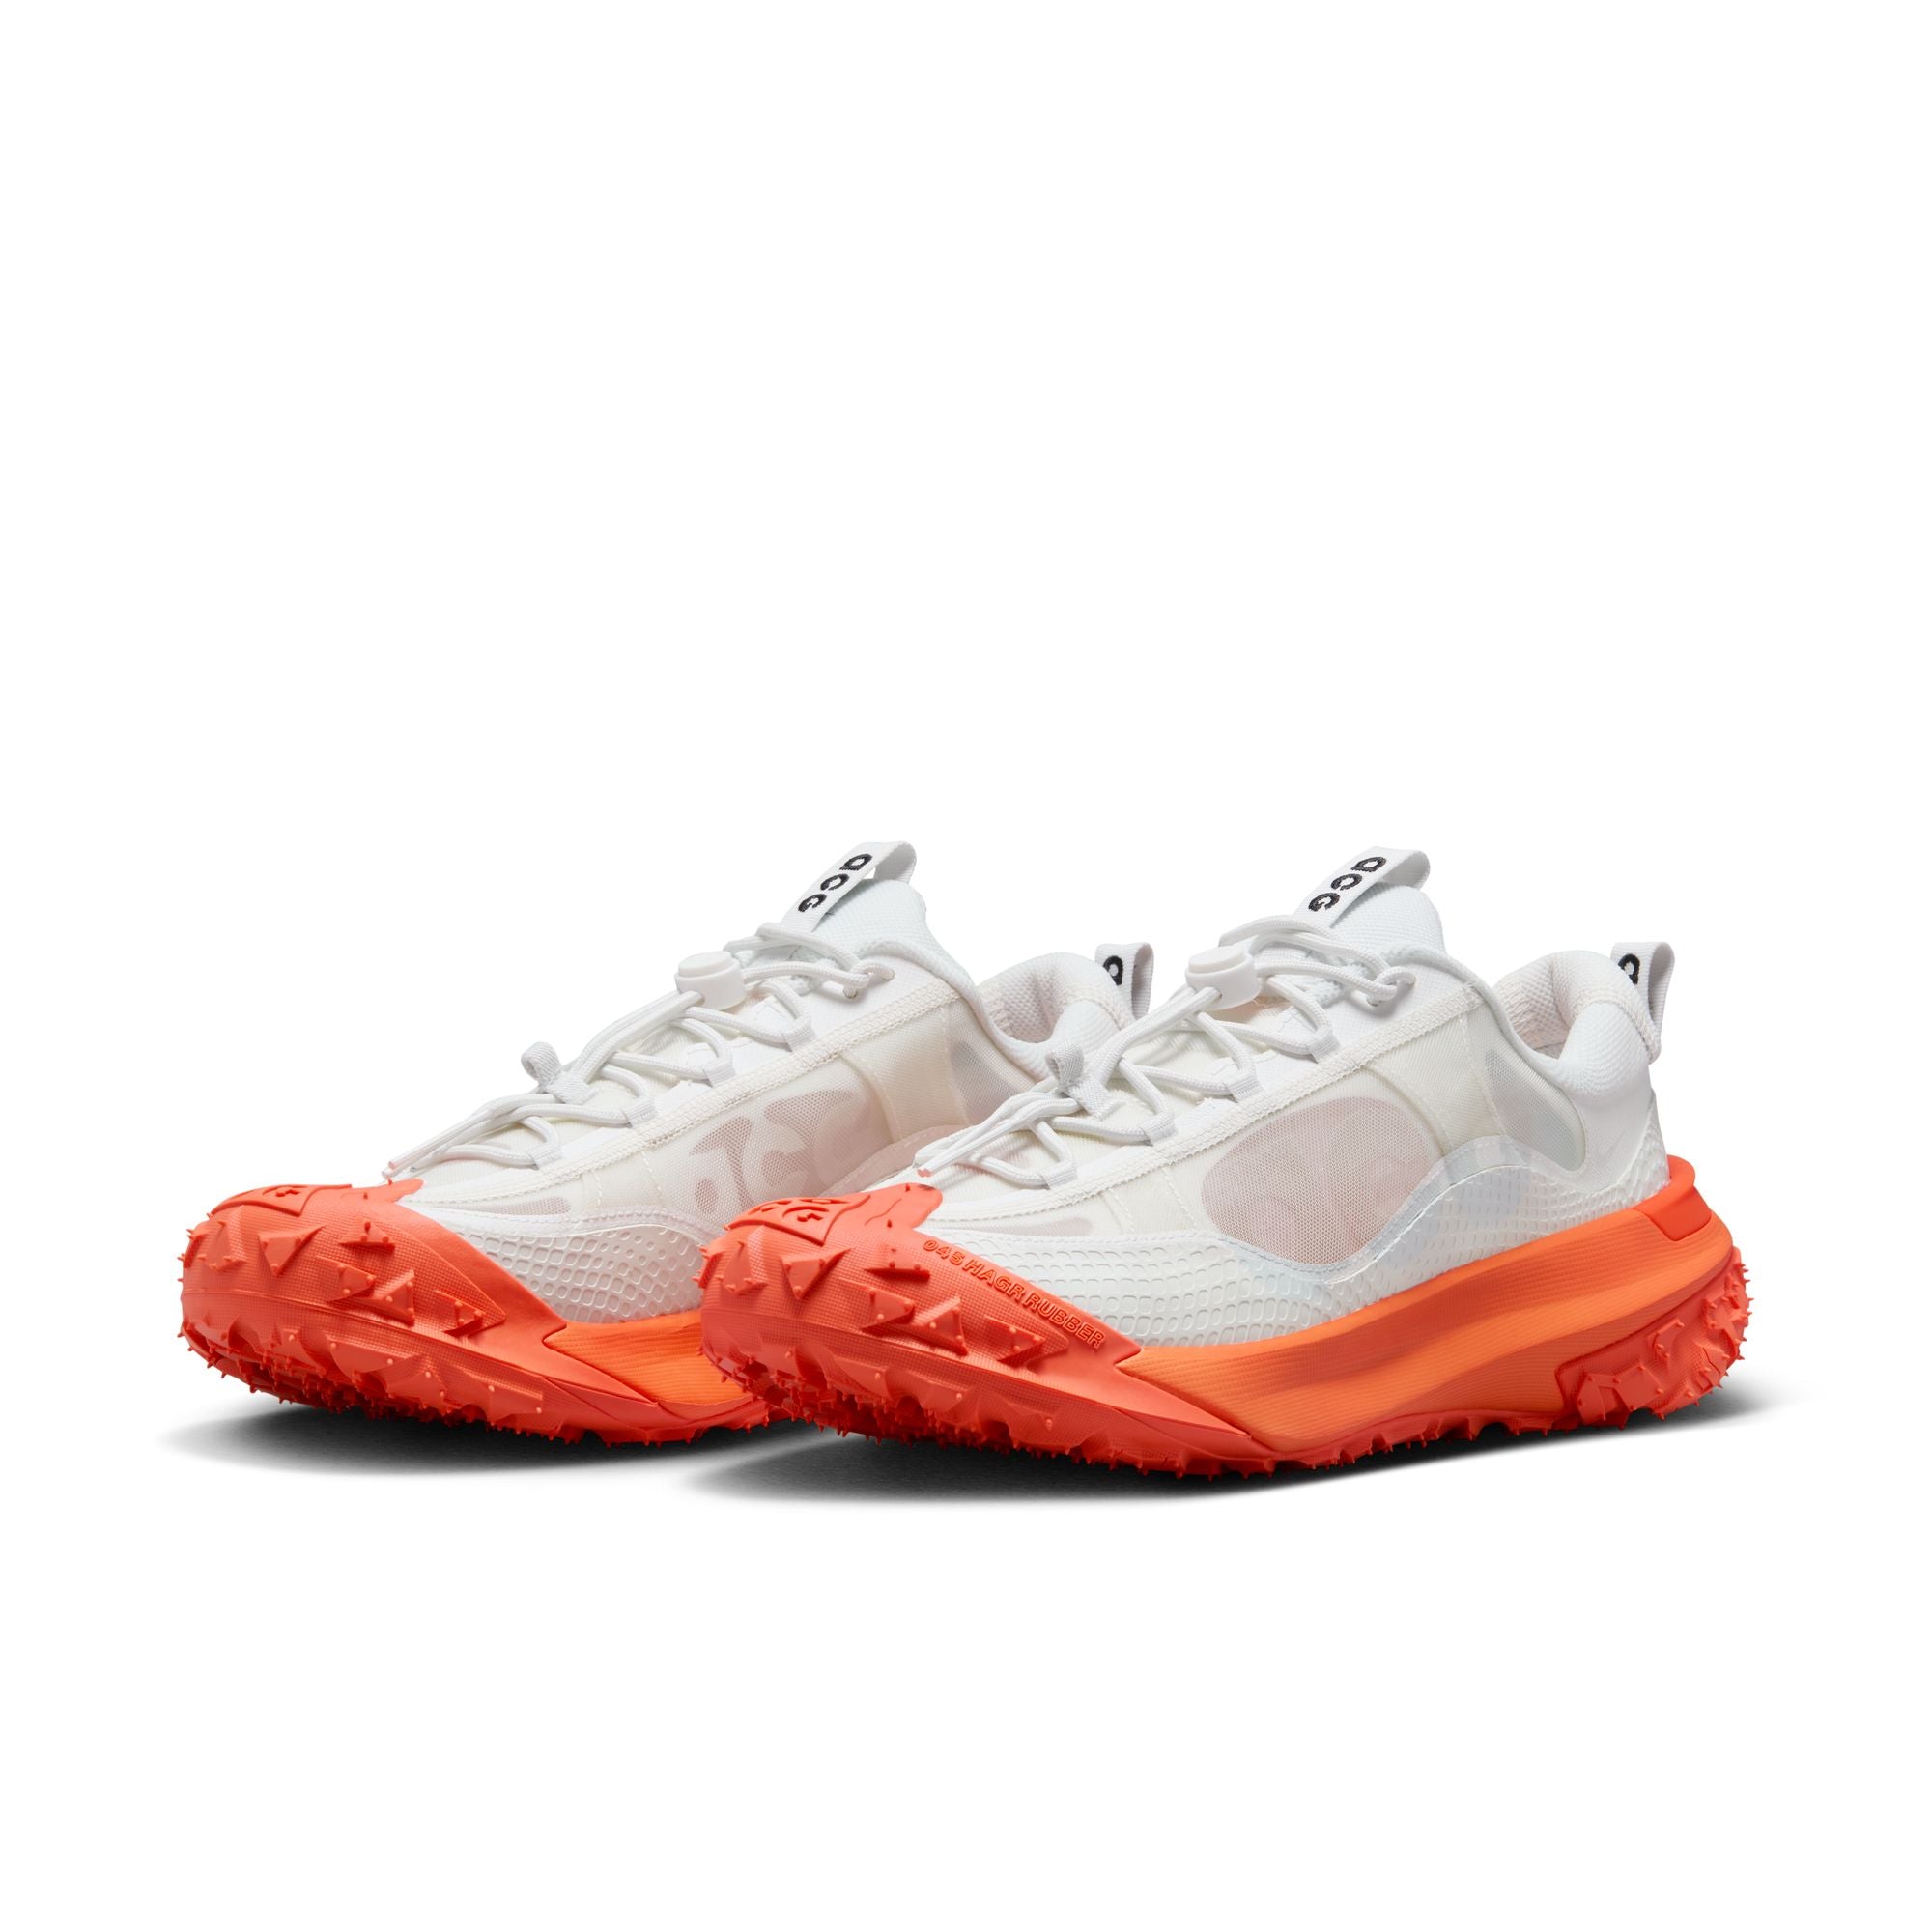 ACG Mountain Fly 2 Low 'Summit White' - INVINCIBLE